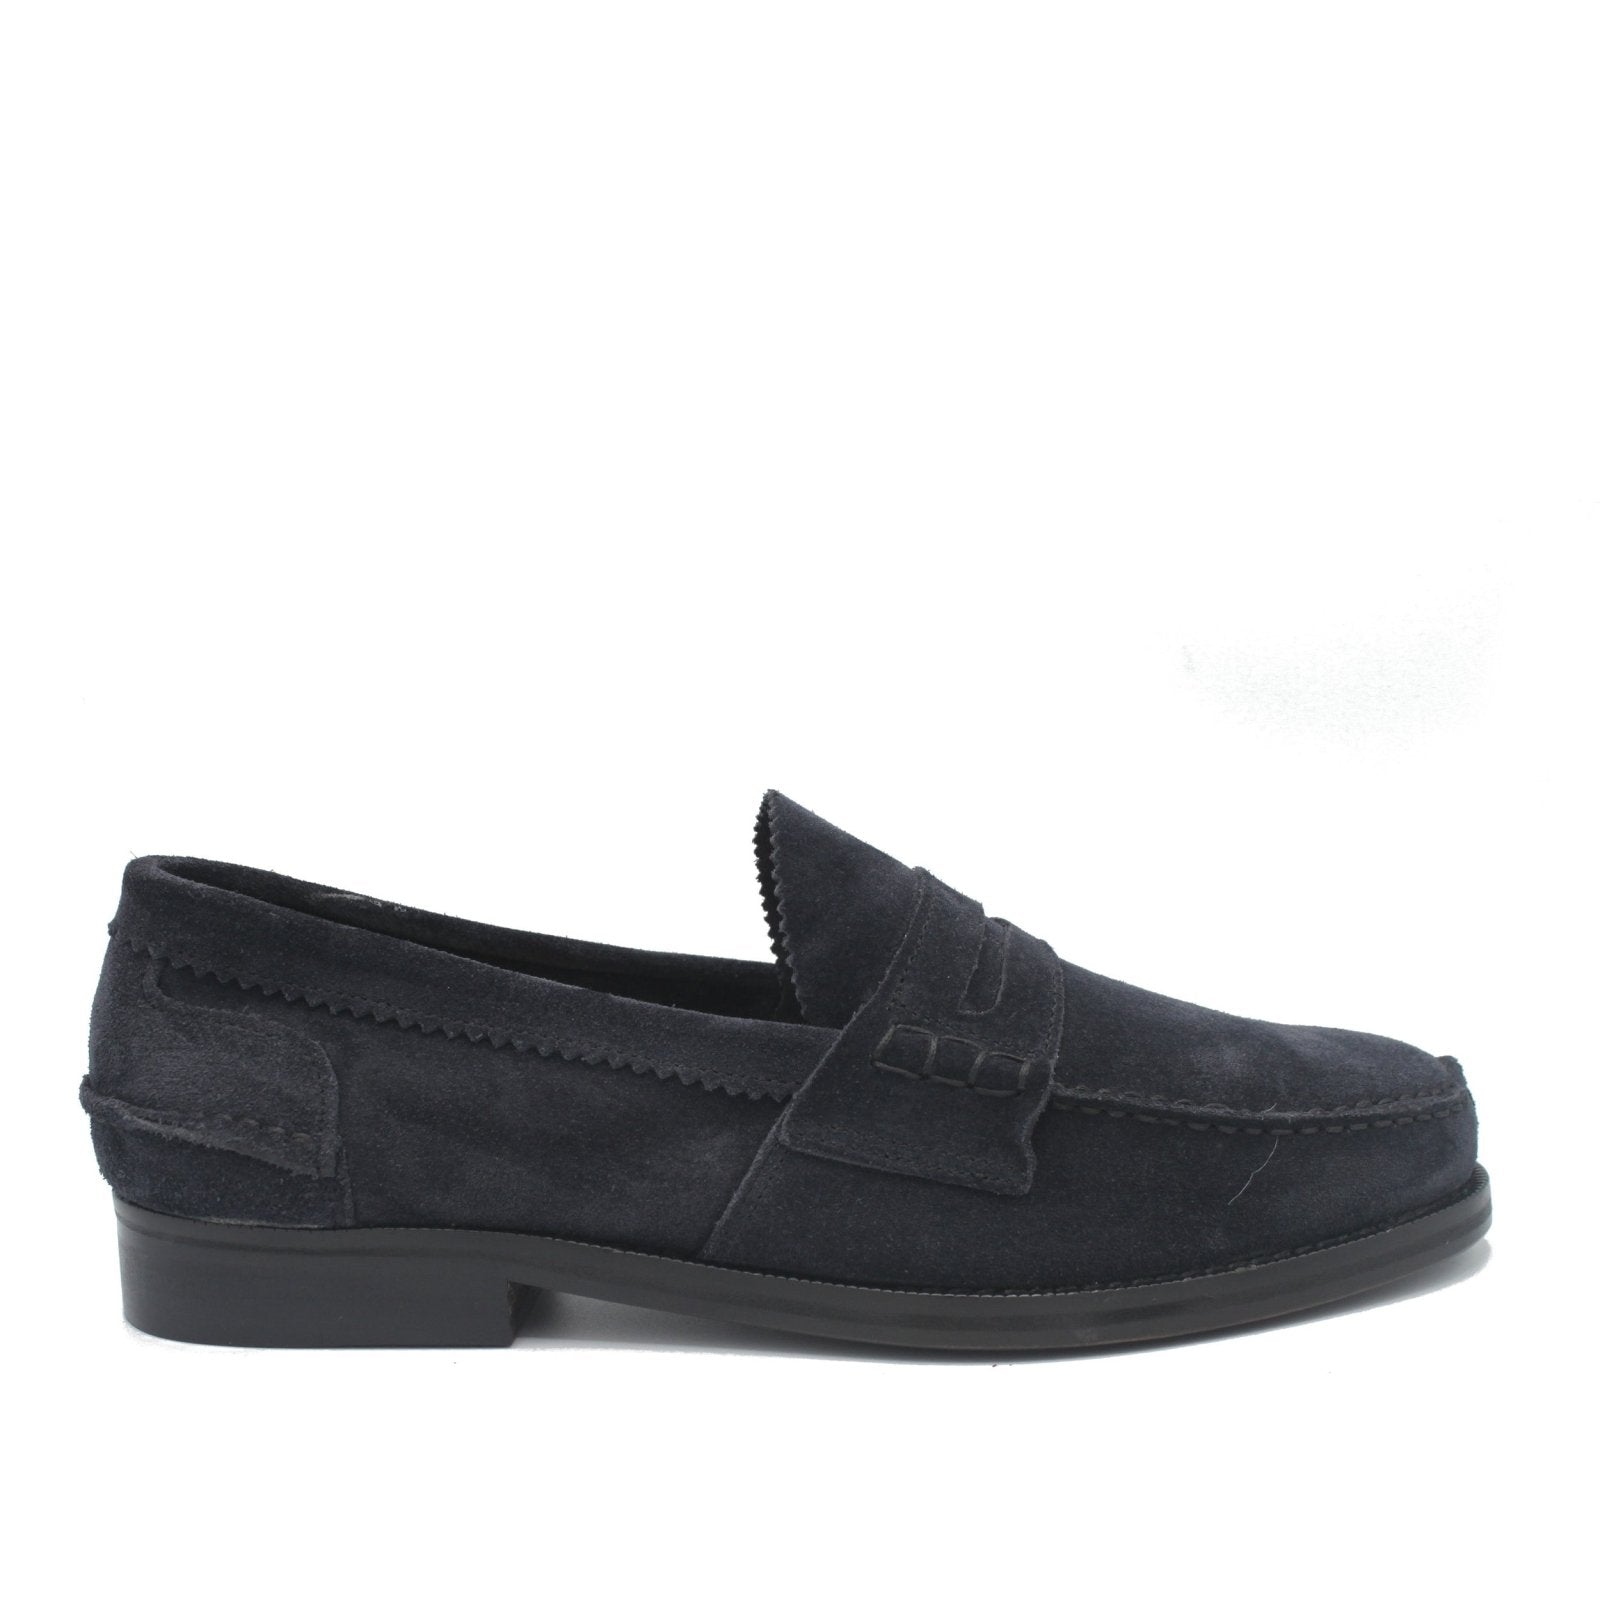 PENNY LOAFER NAVY SUEDE - Saxone of Scotland